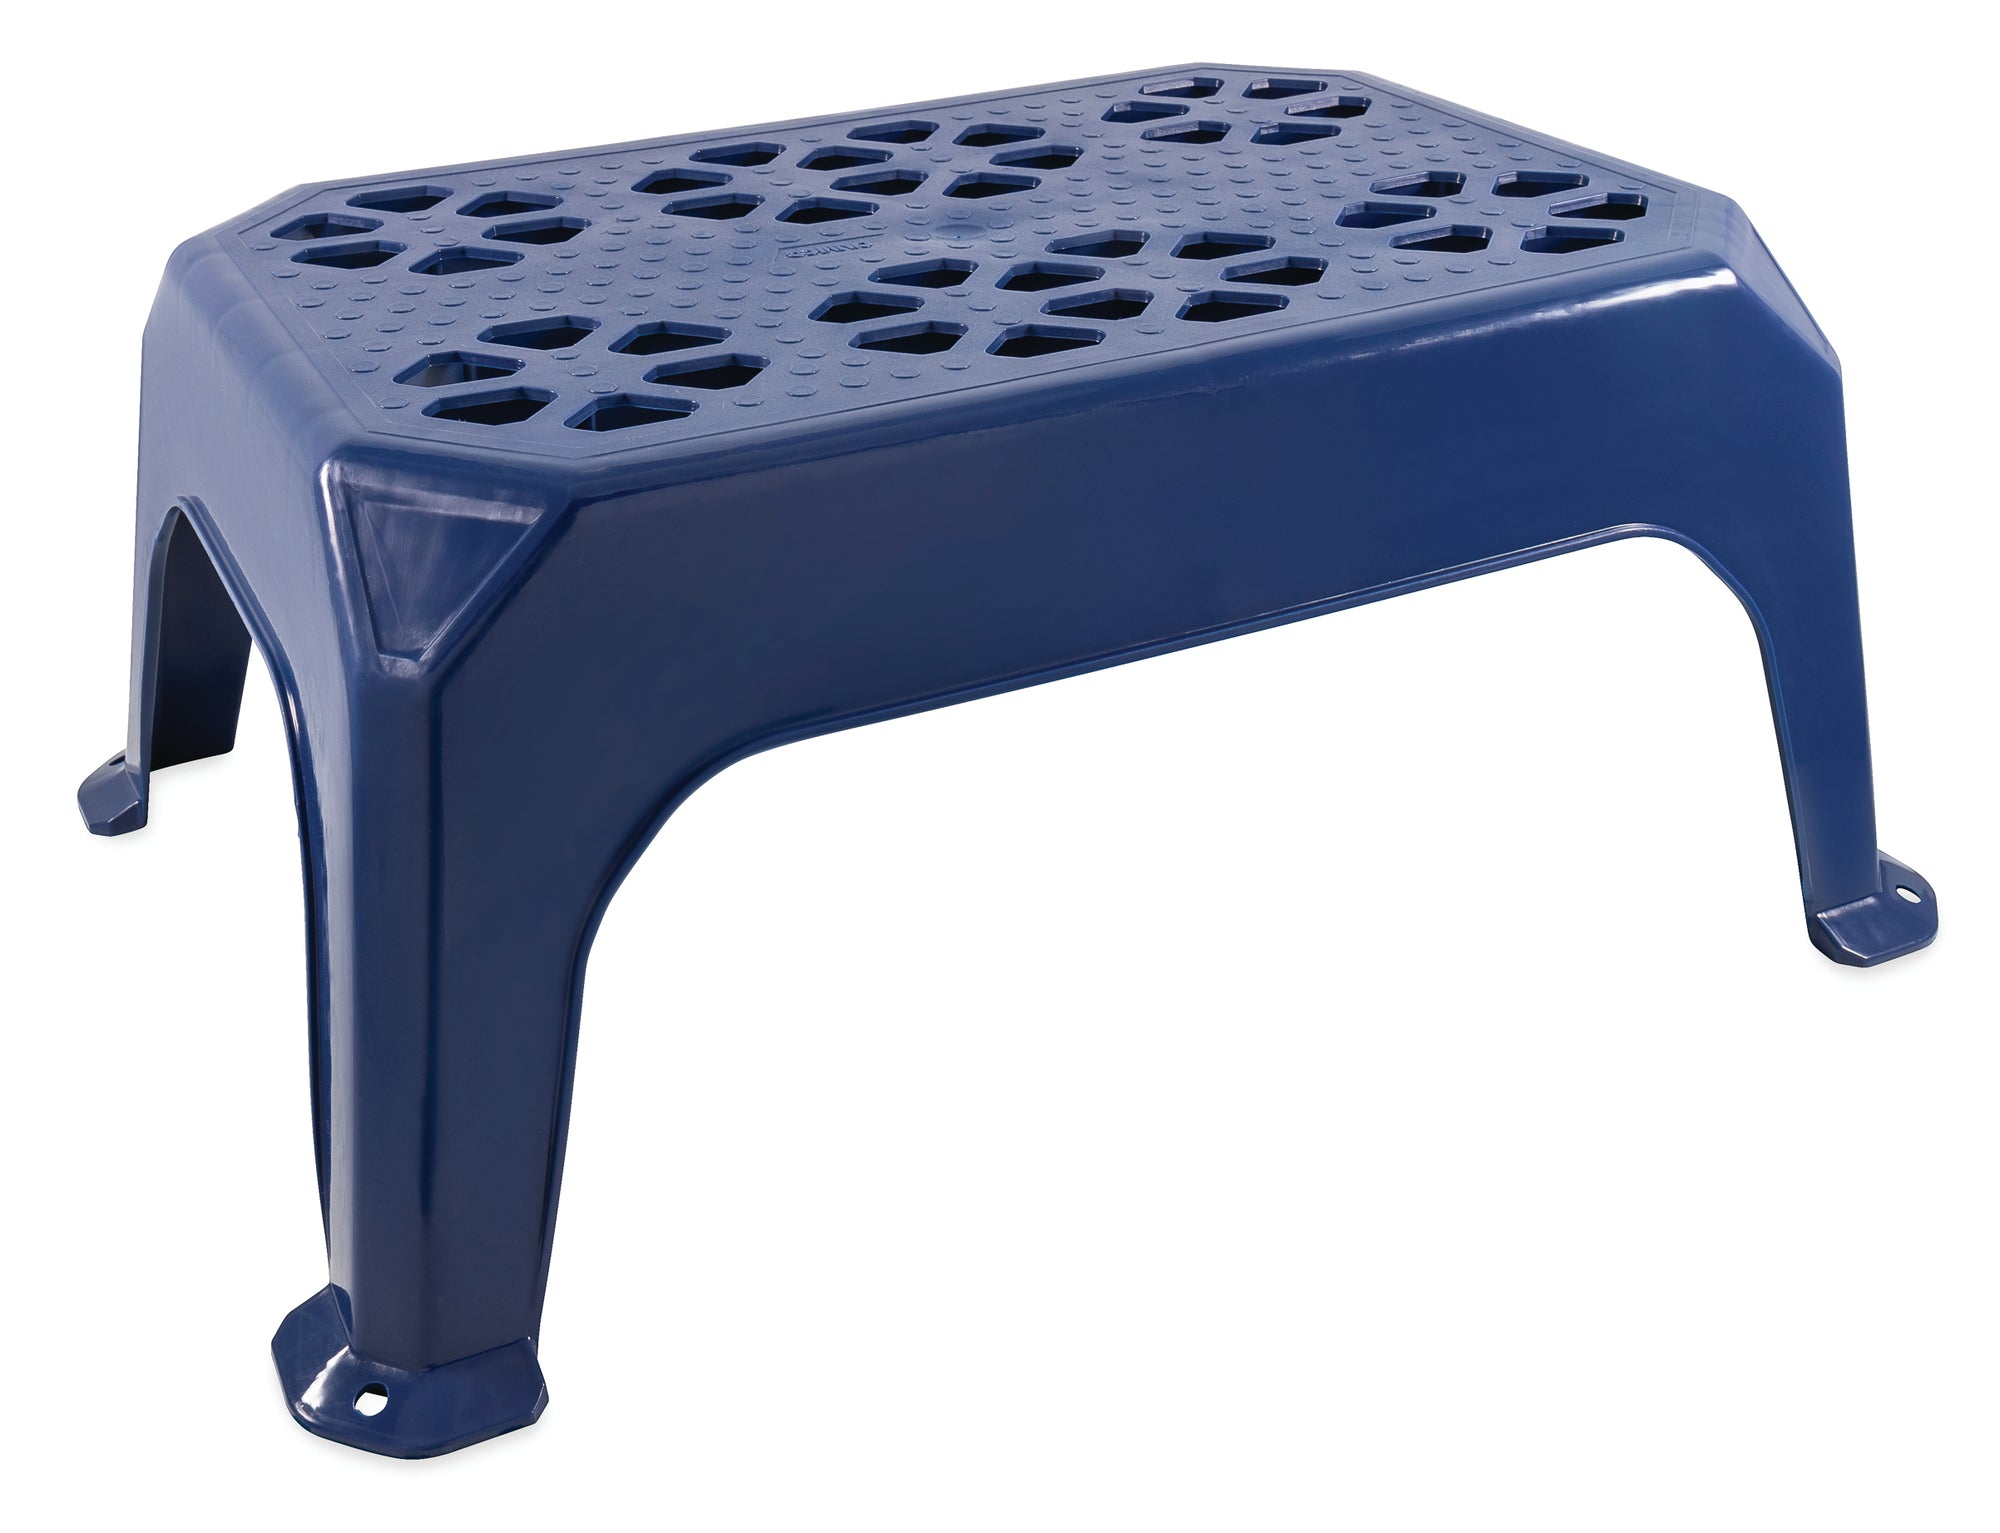 Camco 43473 Plastic Step Stool - Large, Navy